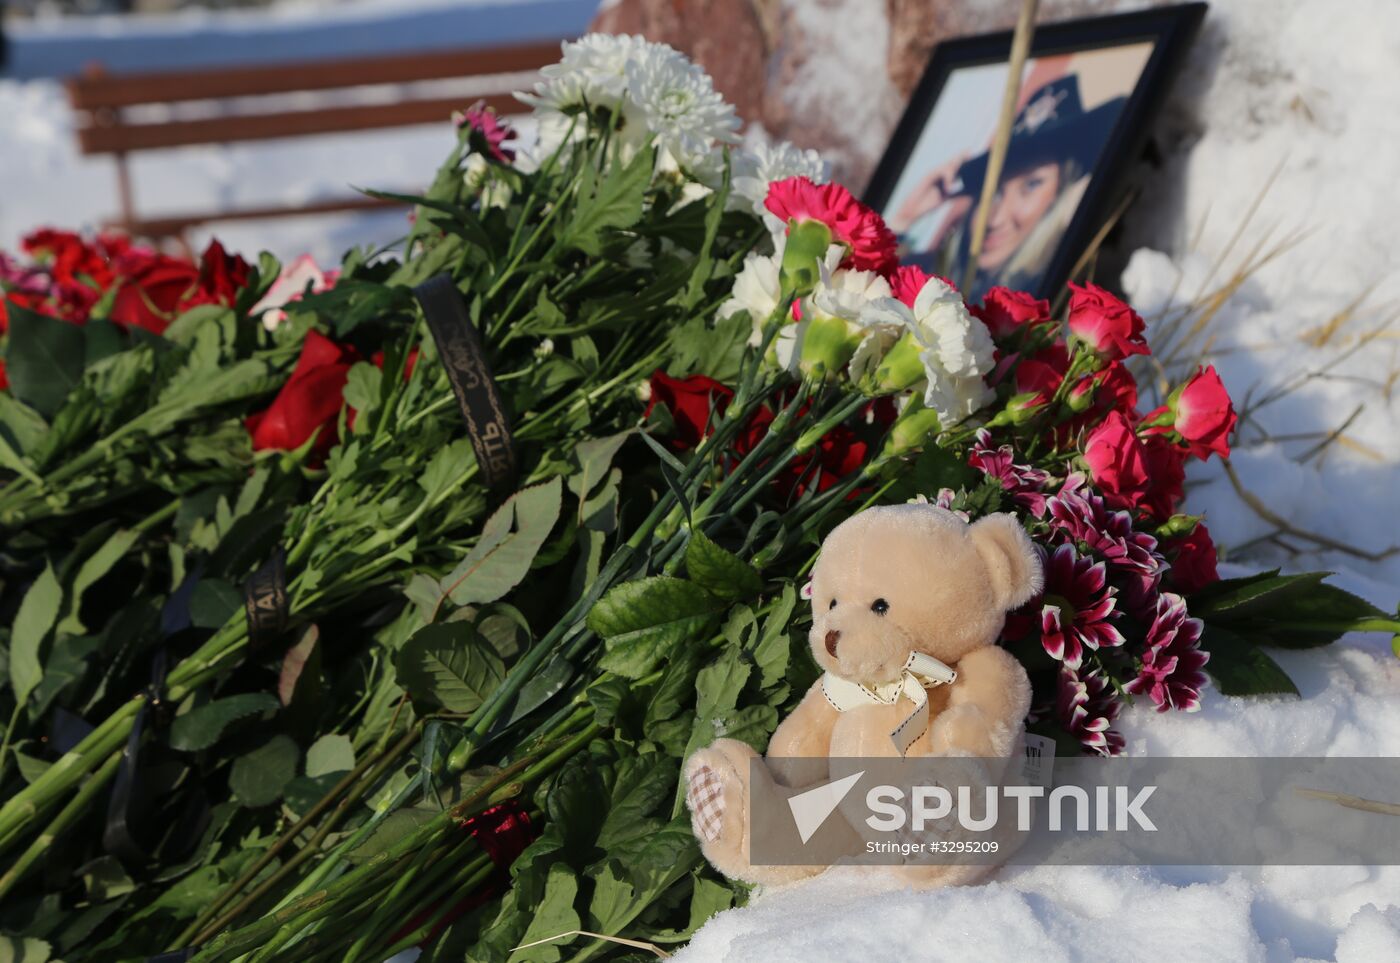 People bring flowers to mourn An-148 crash victims